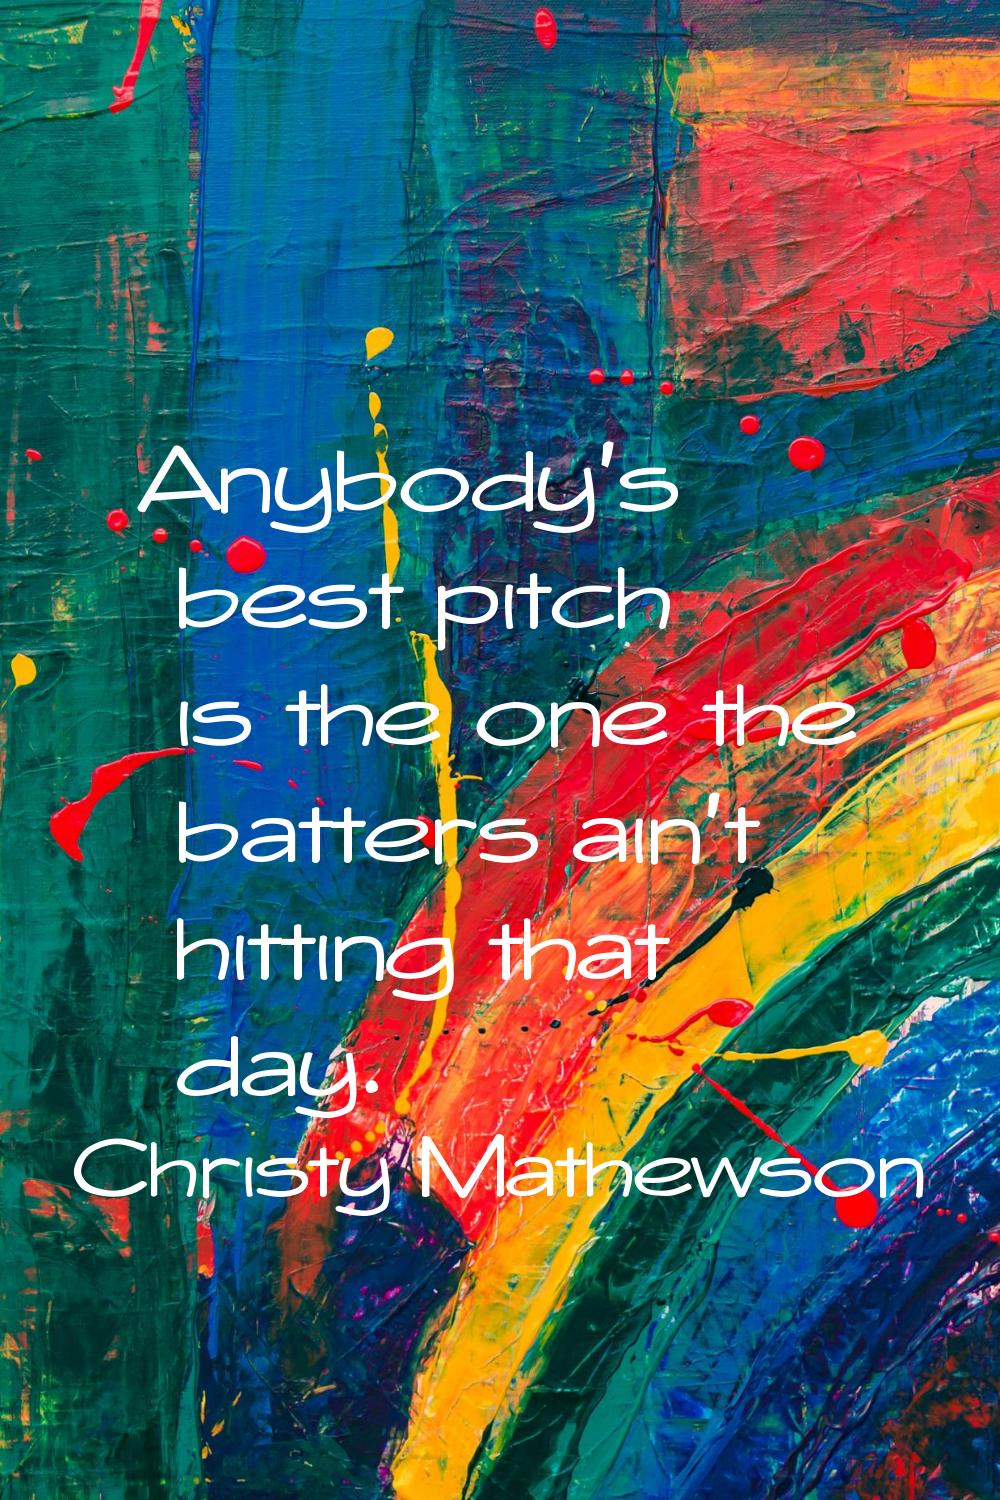 Anybody's best pitch is the one the batters ain't hitting that day.